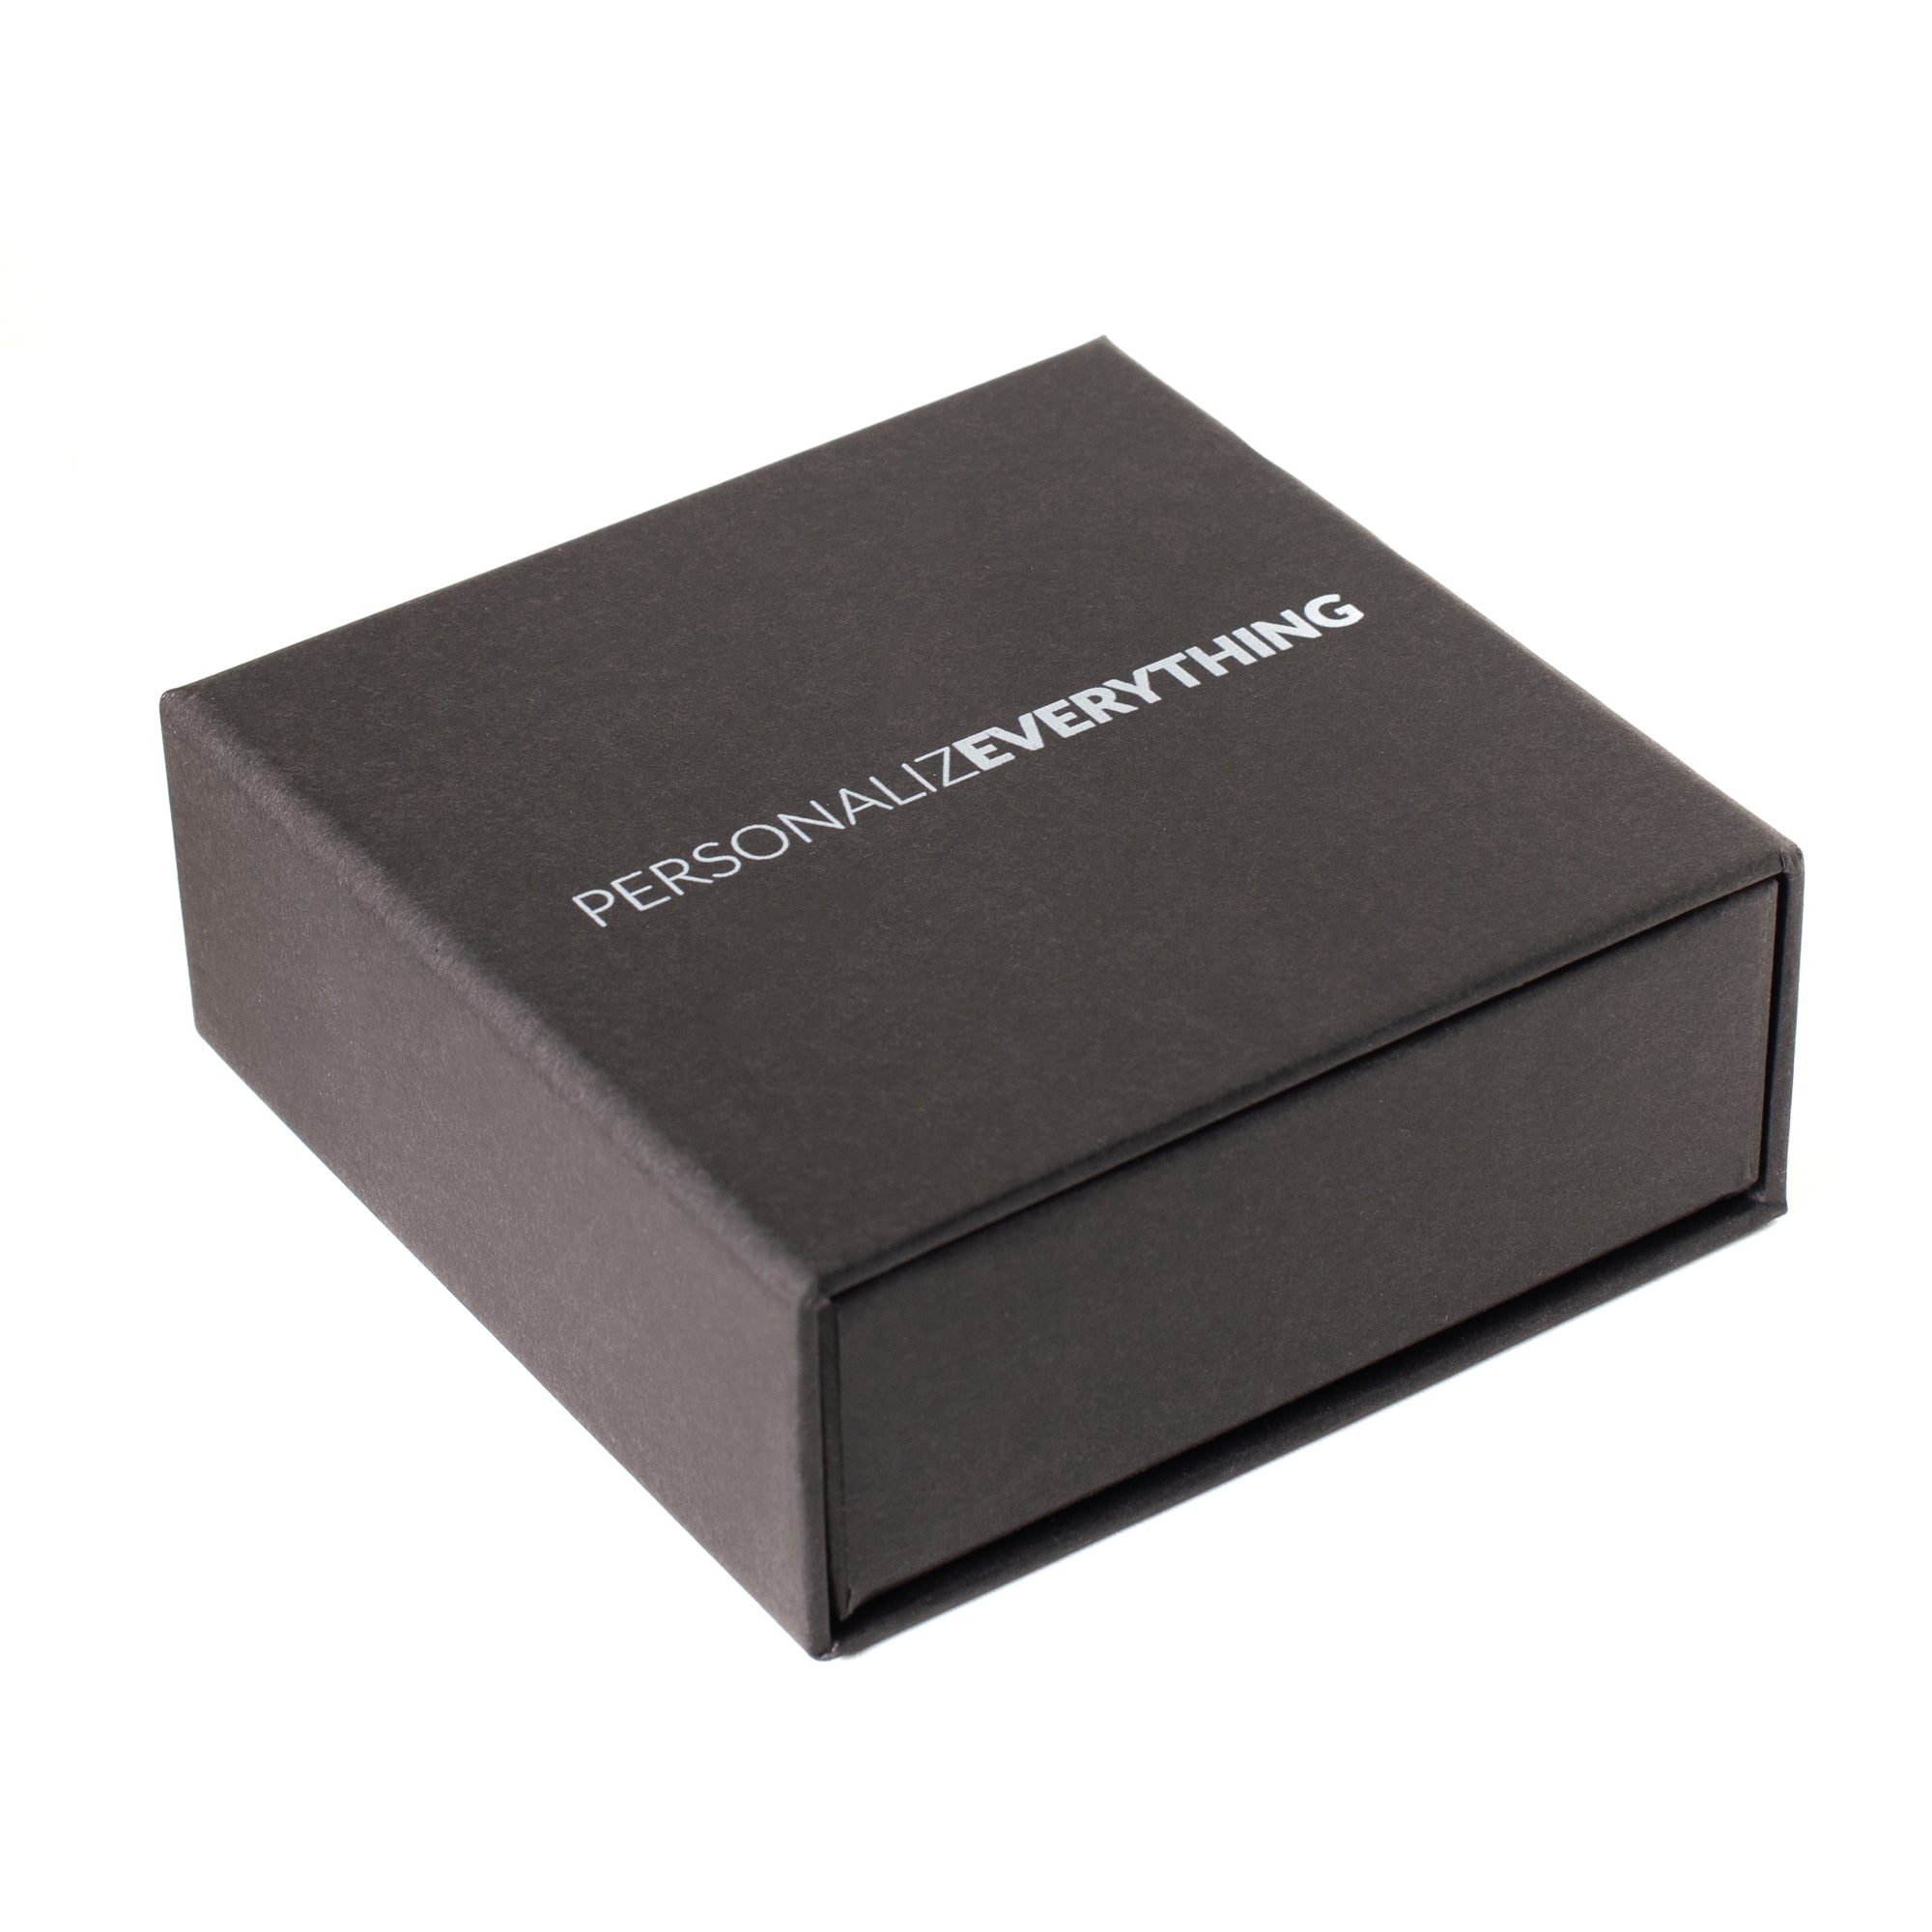 Personalize Everything custom packaging box